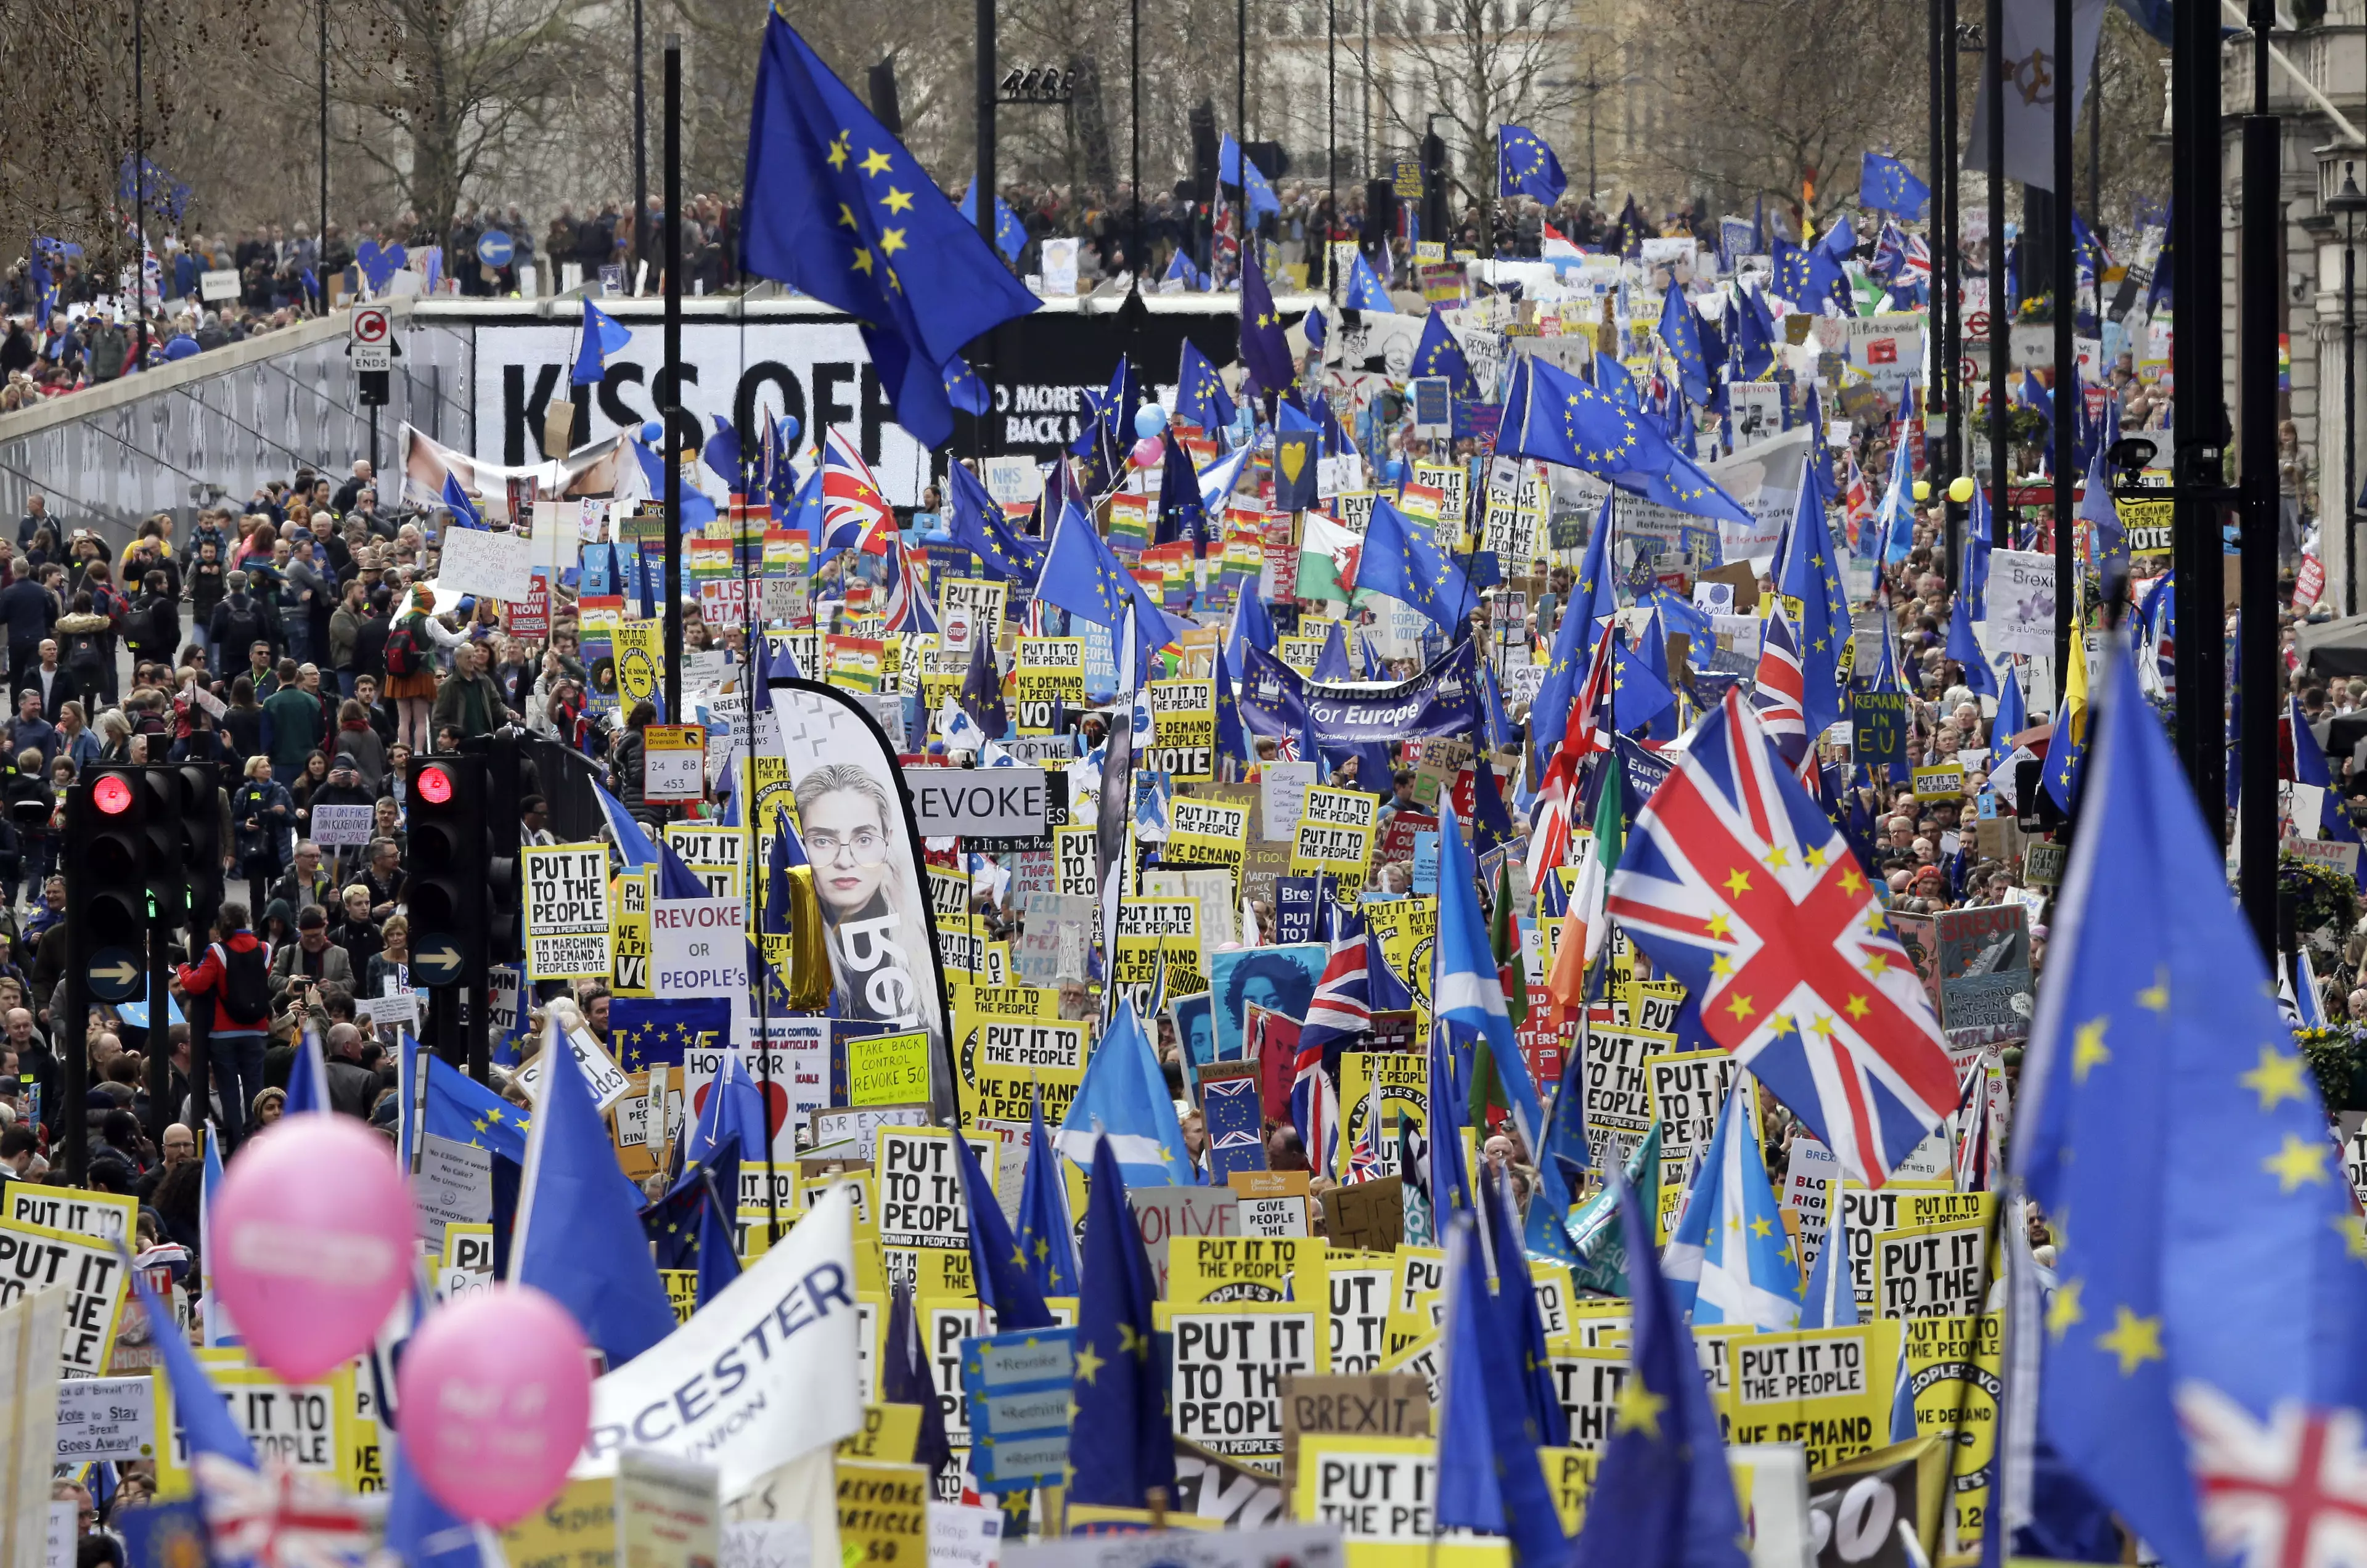 The 'People's Vote' march is thought to have been attended by a million people.